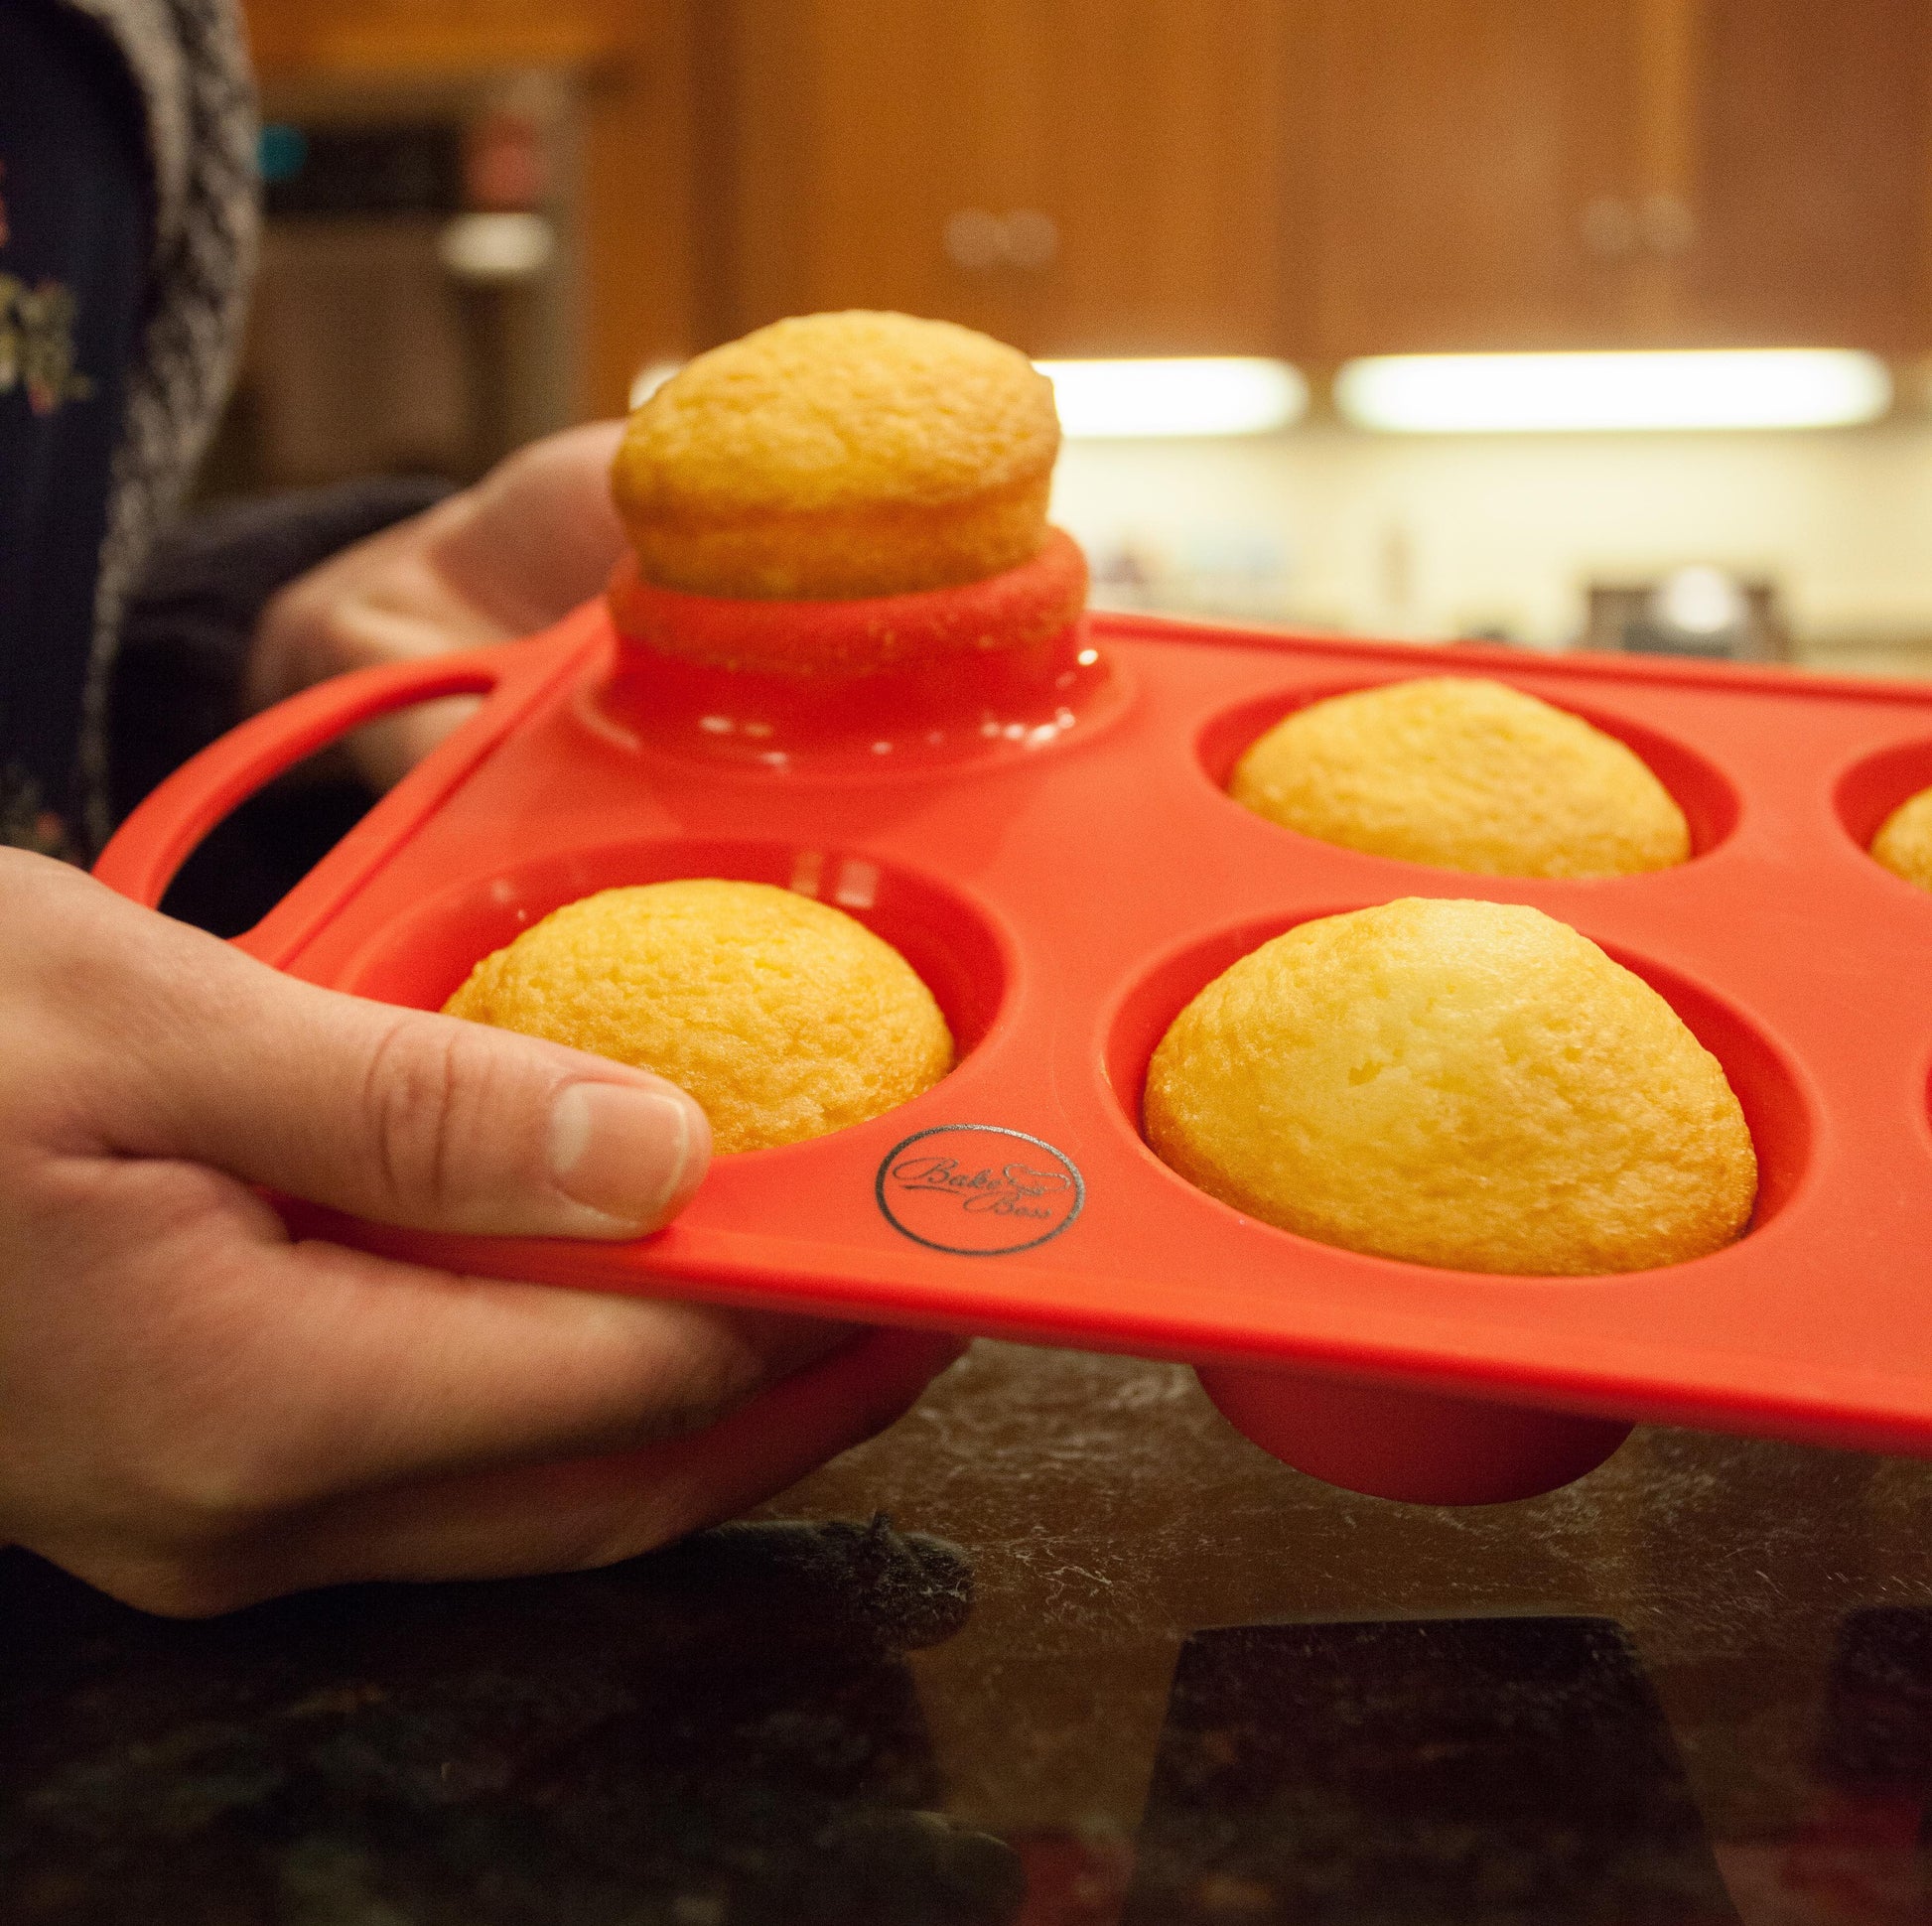 BAKE BOSS Silicone Muffin Pan with Handles, 6 Cup Regular Size Cupcake Pan,  Perfect Silicone Muffin cups for Baking Keto Paleo Vegan Muffin Recipes